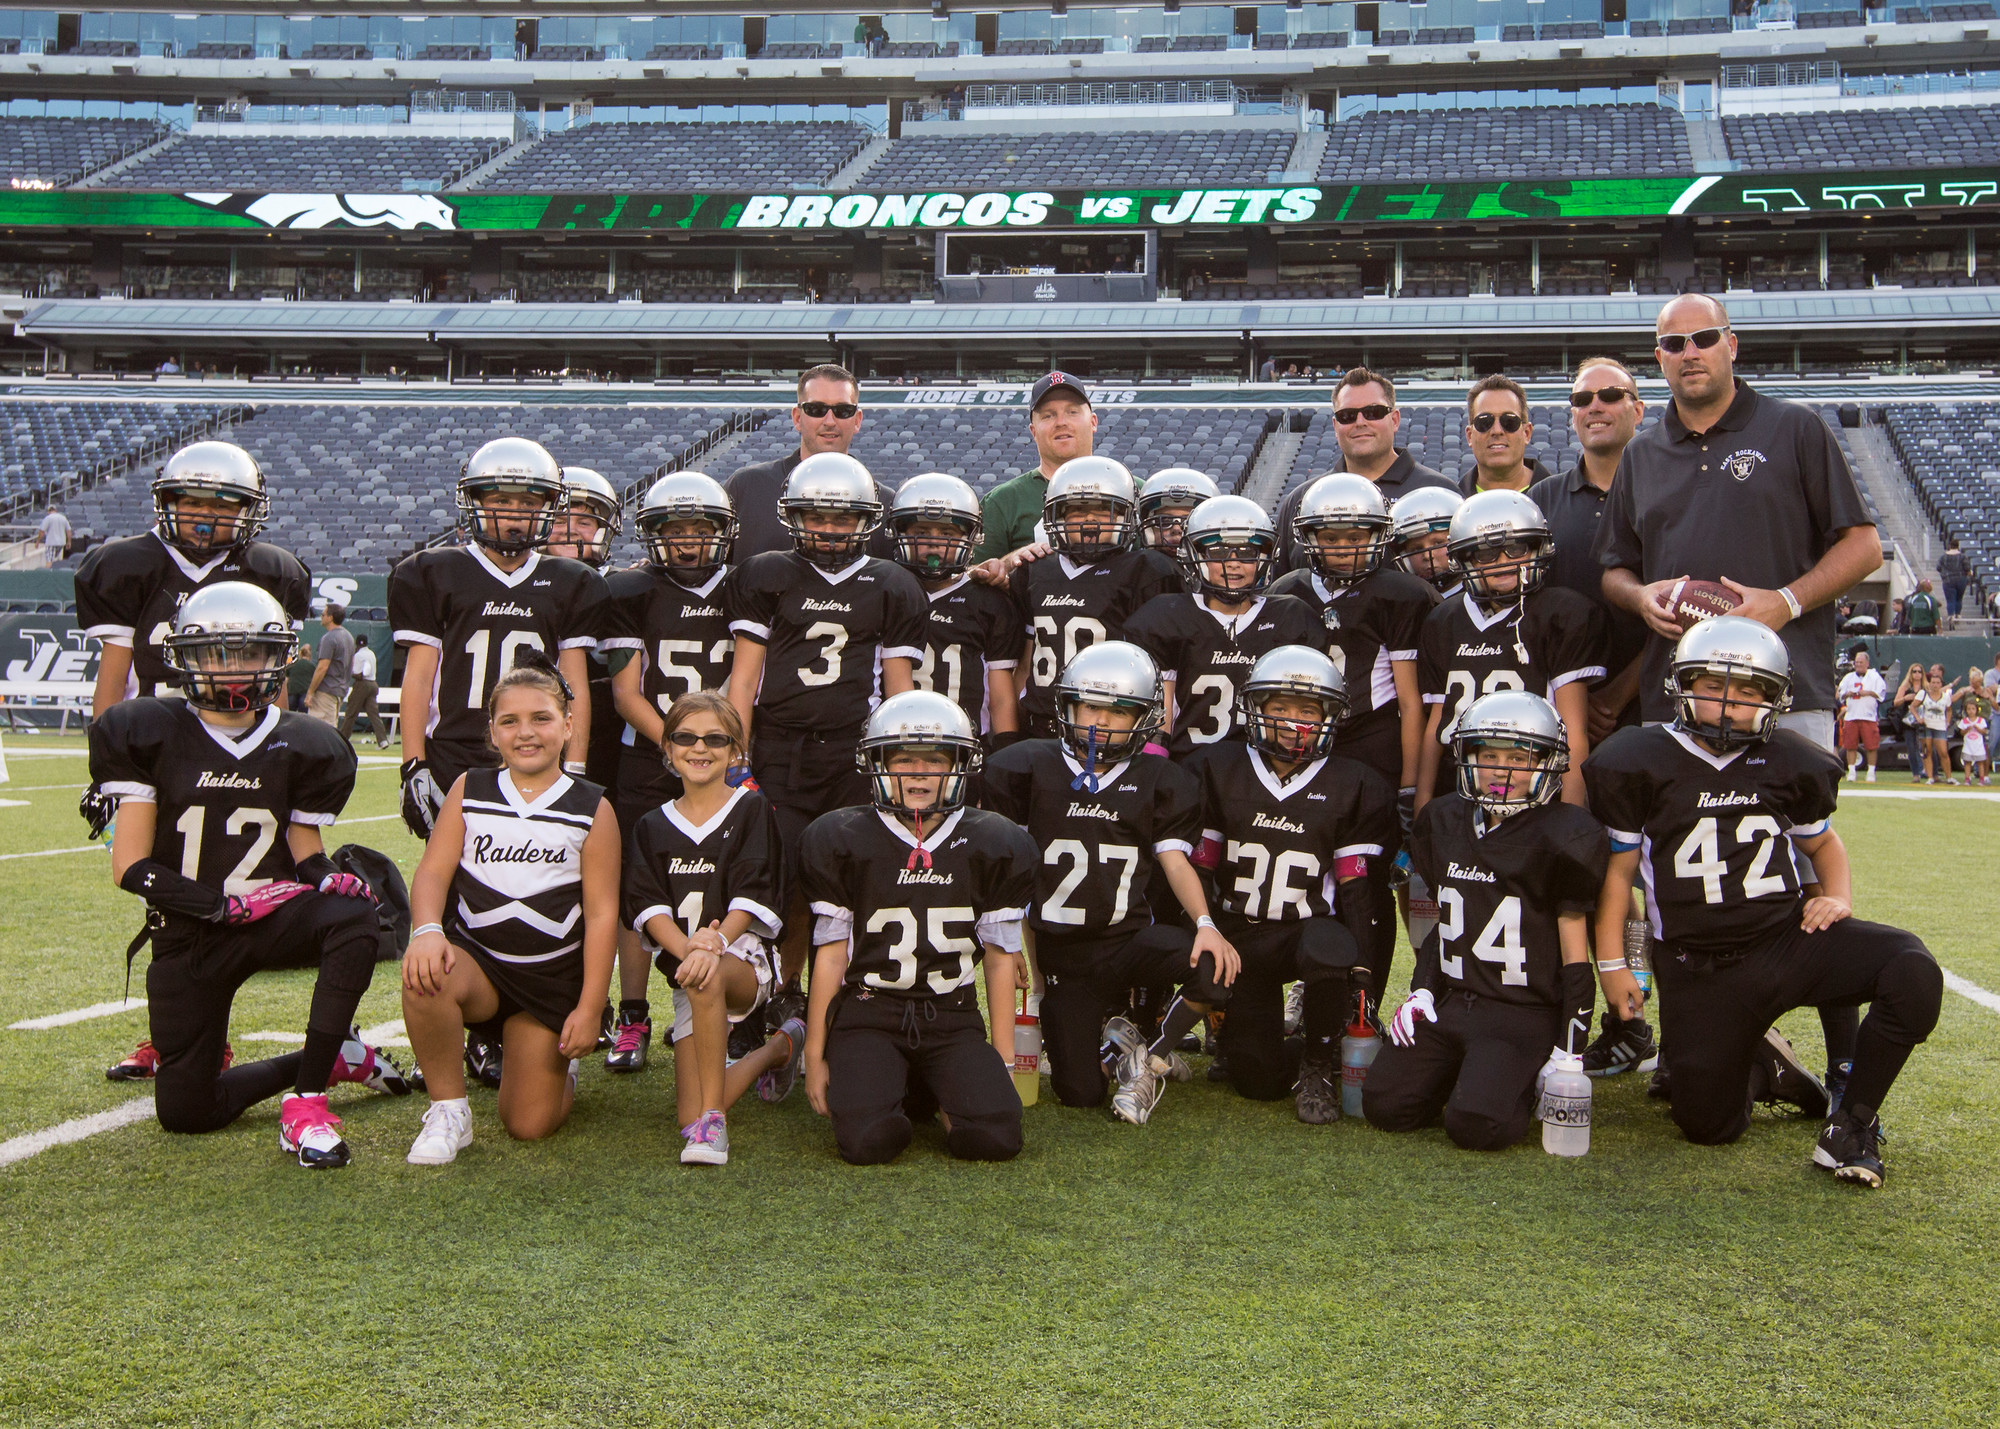 The raiders, cheerleaders and coaches paused for a team photo after their scrimmage at MetLife Stadium.